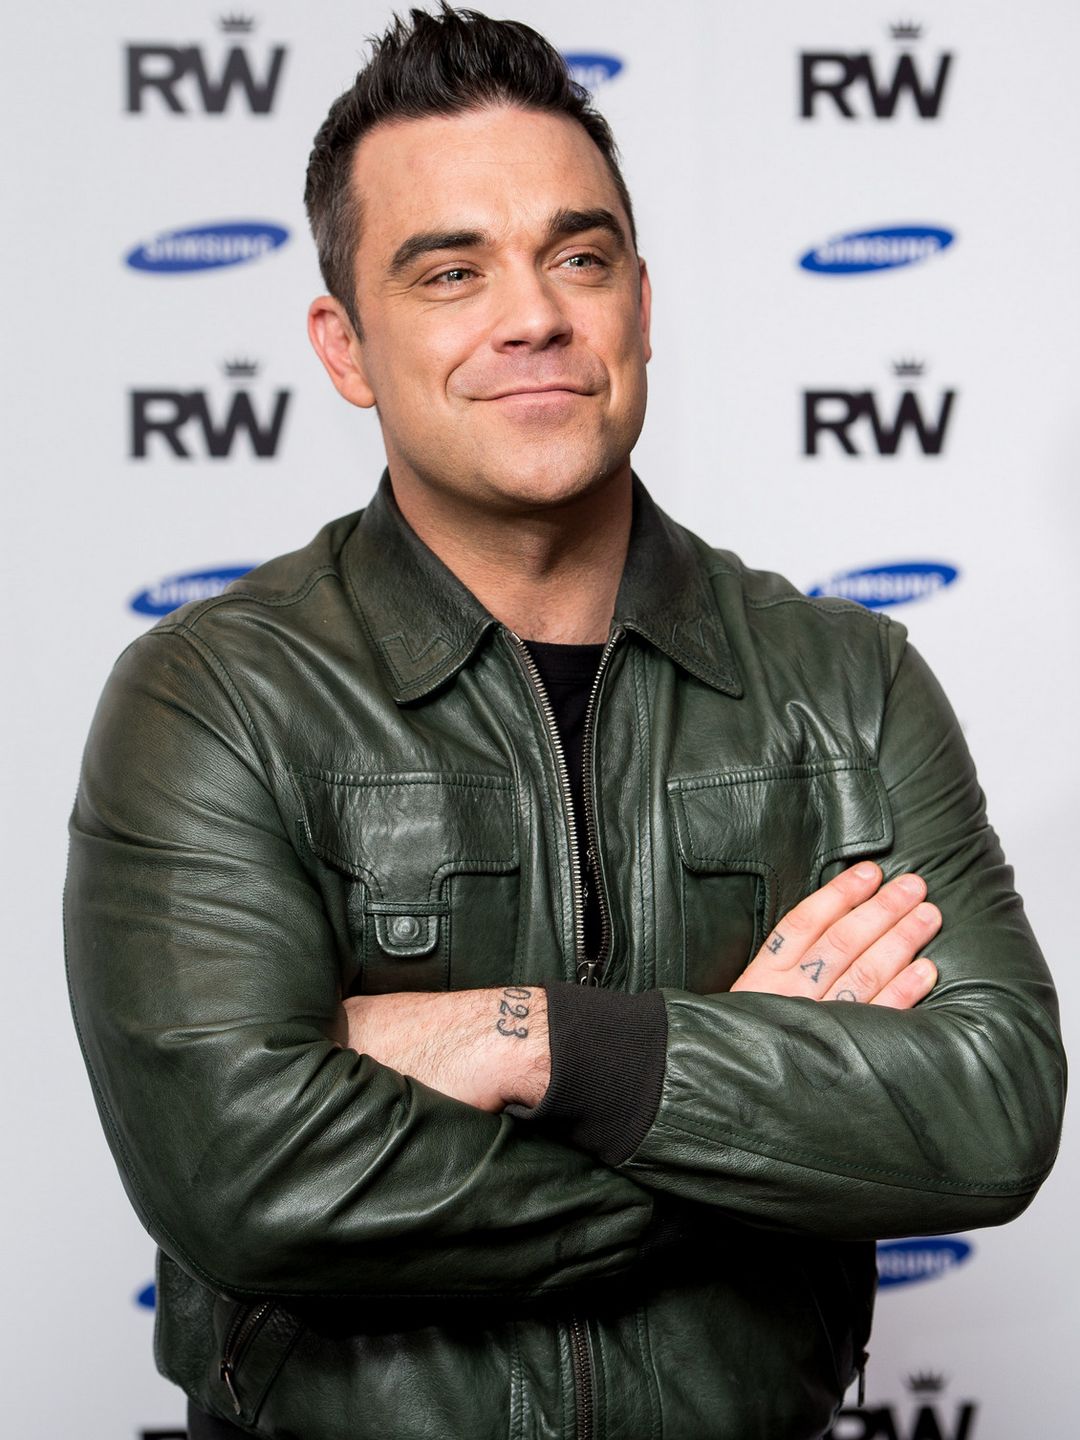 Robbie Williams who are his parents